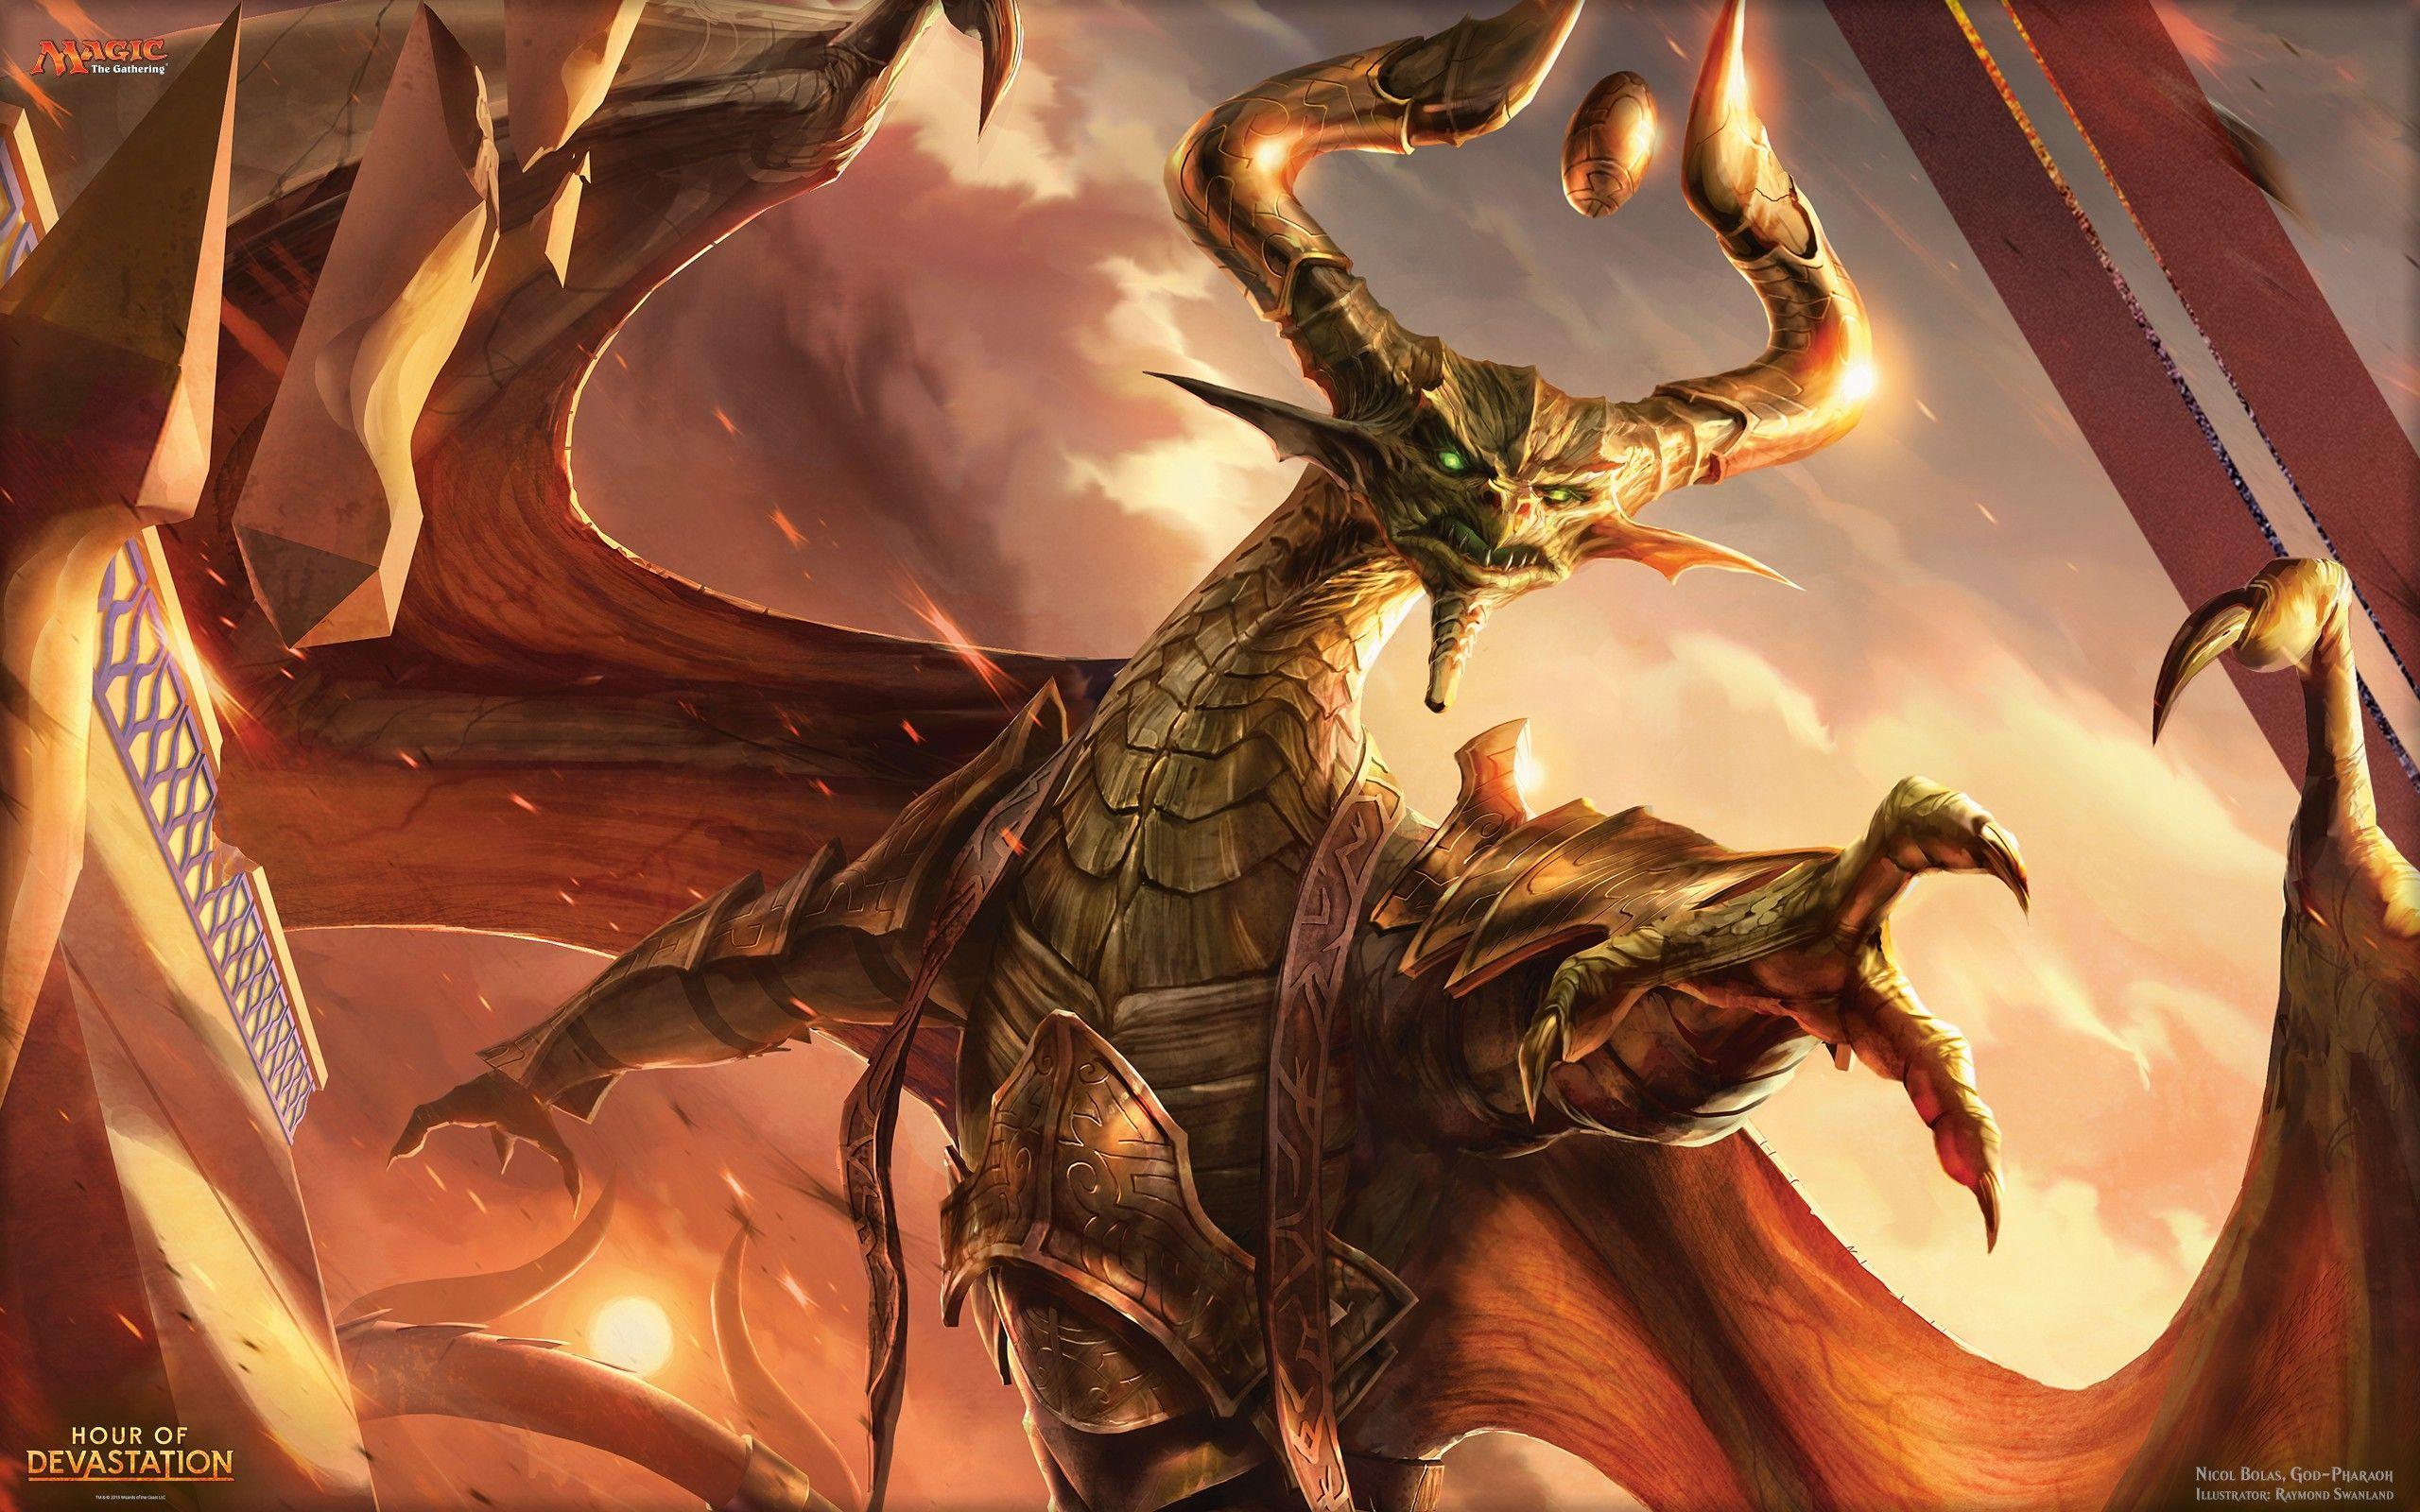 Res 1920x1080 Magic The Gathering Trading Card Games HD Wallpapers   Desktop and Mobile Images  Photos  Android wallpaper Hd wallpaper Magic  the gathering